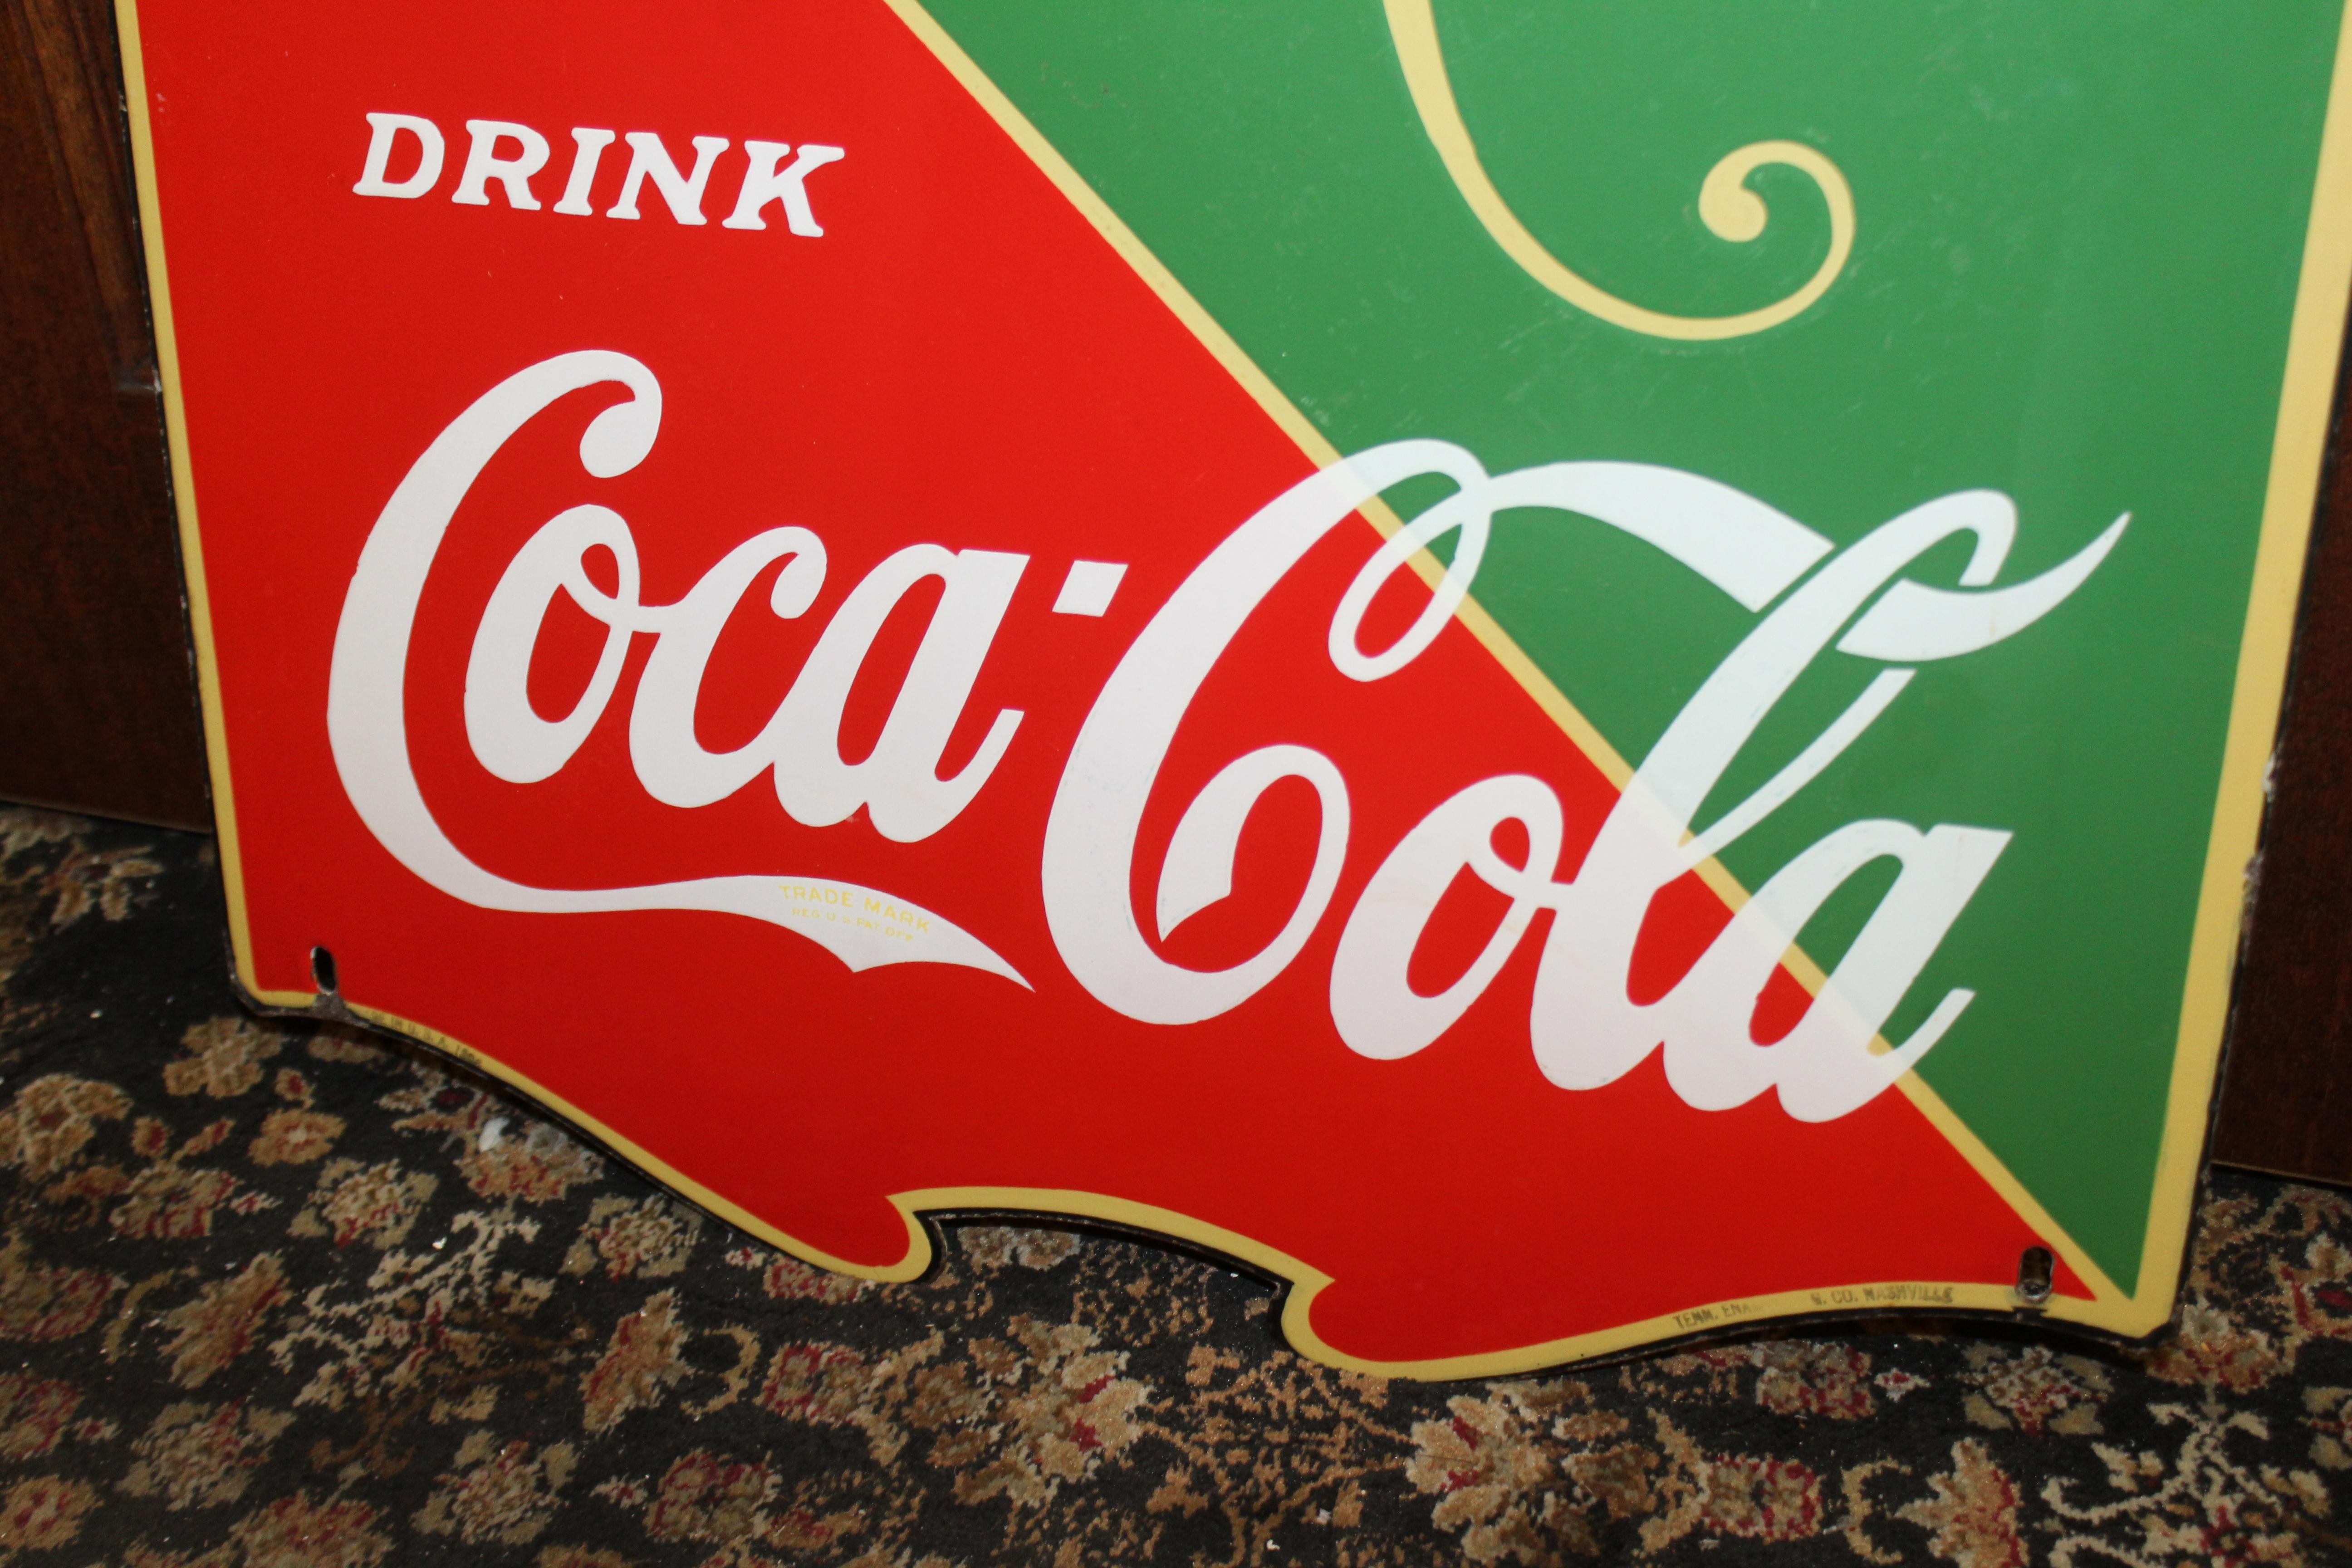 This item is a 1935 Coca Cola 